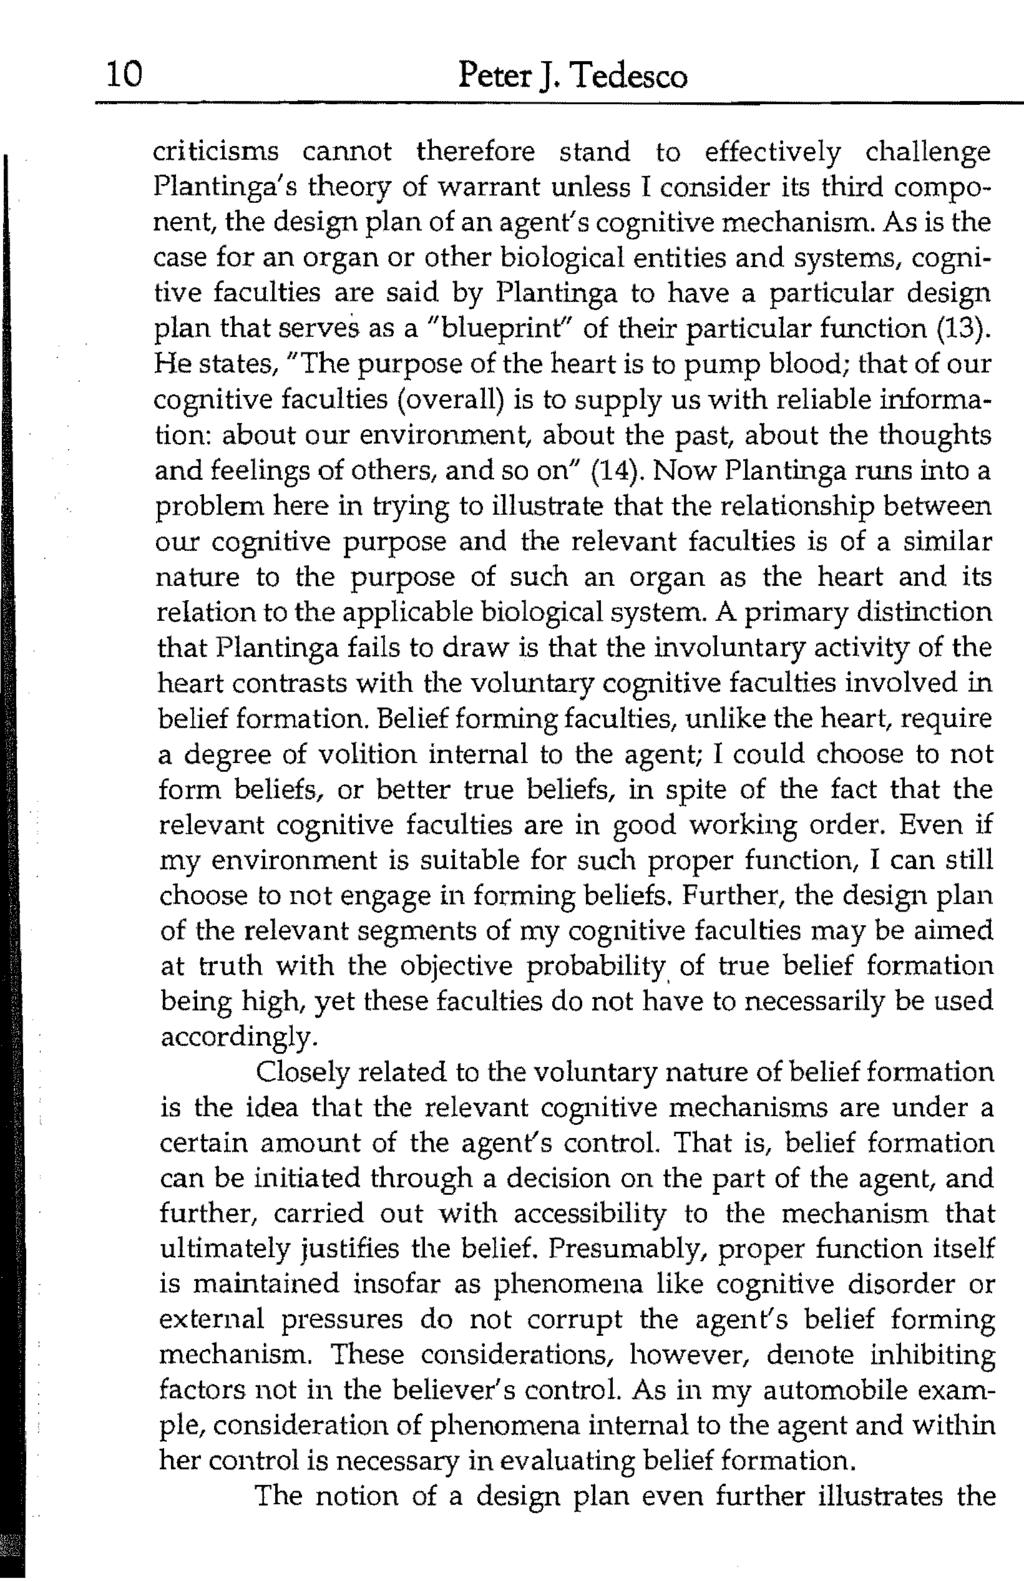 10 Peter J. Tedesco criticisms cannot therefore stand to effectively challenge Plantinga's theory of warrant unless I consider its third component, the design plan of an agent's cognitive mechanism.